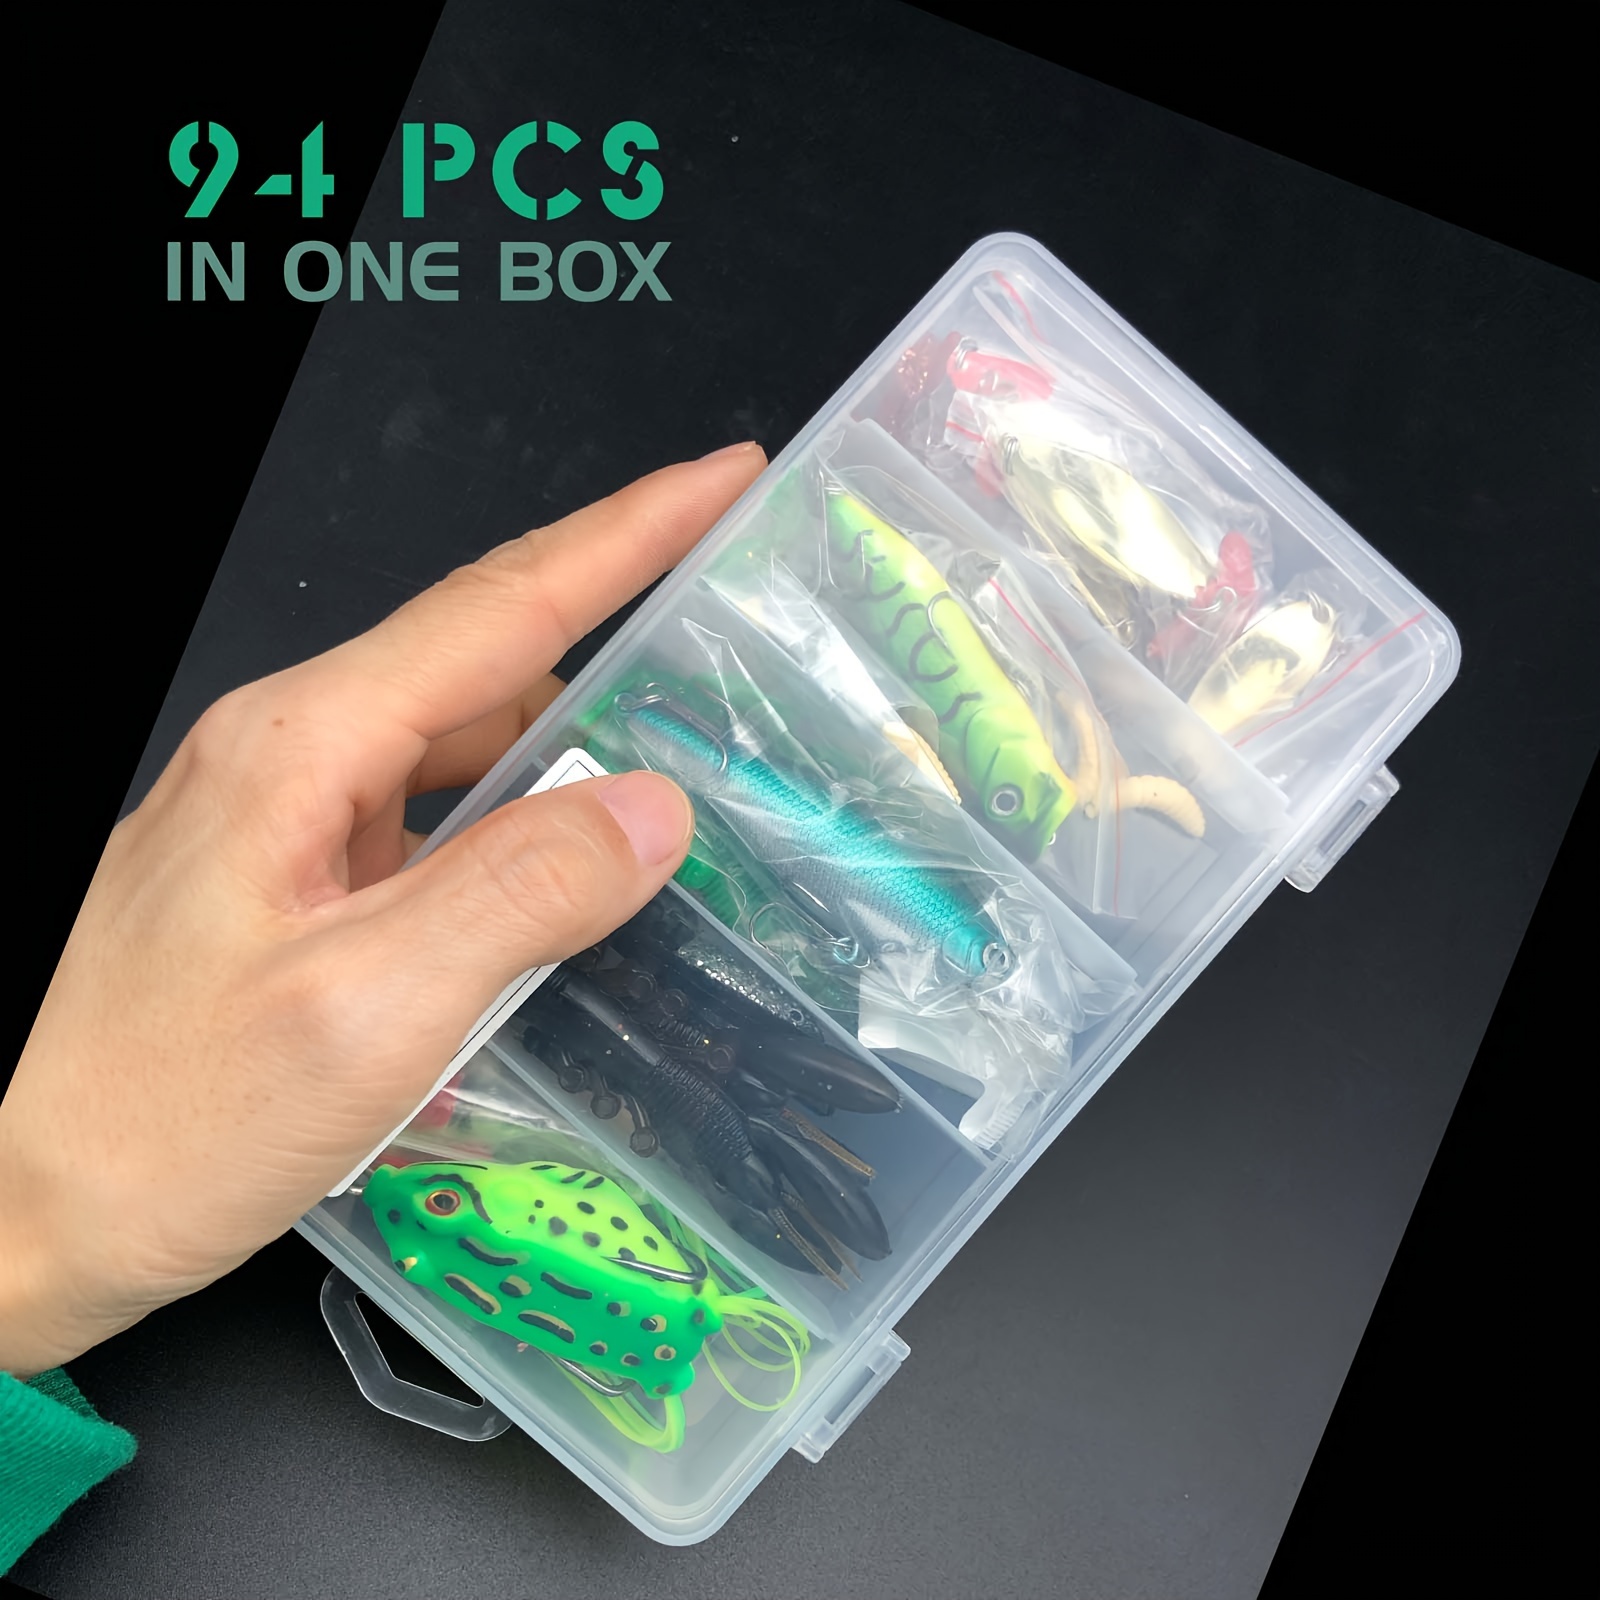  283PCS Fishing Lure Kit Crankbait Frog Popper Fishing Plier  Hooks Minnow Spoon Spinner Bait Soft Lure Fishing Worm Grub Trout Salmon  For Freshwater And Saltwater Fishing Accessories Kit Tackle Box